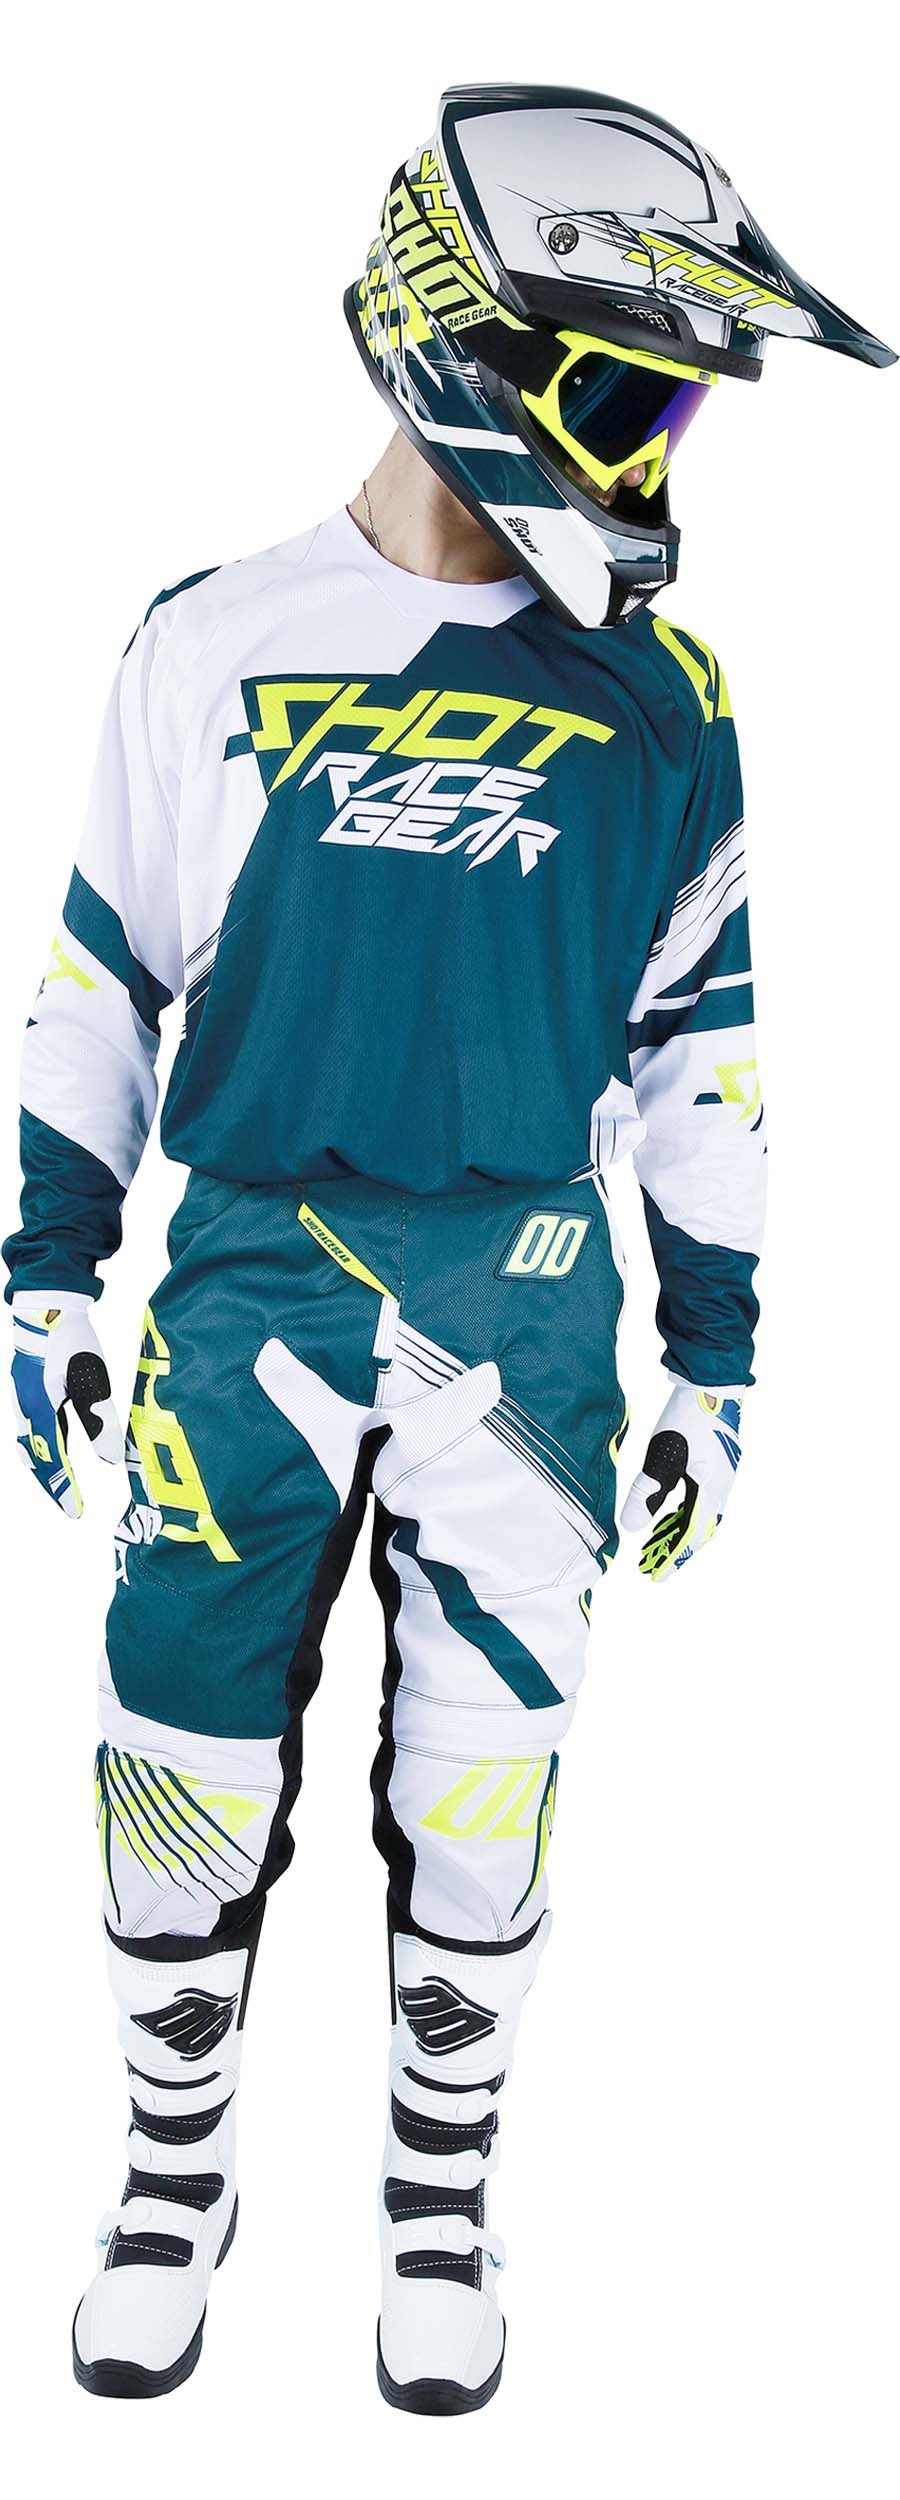 Shot MX 2017 | Contact Claw Motocross Motorcycle Race Gear